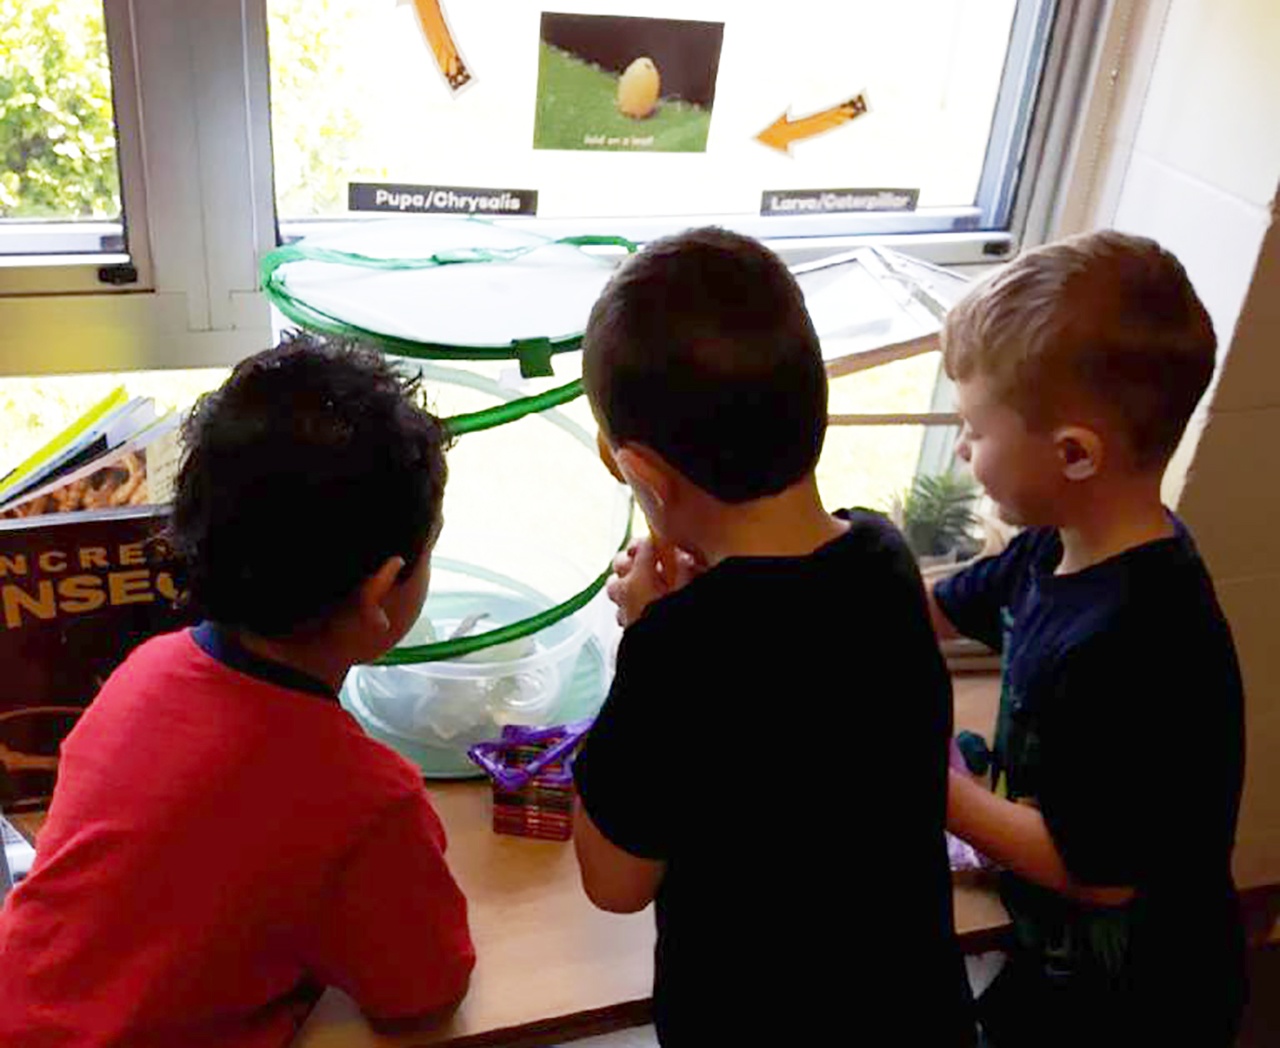 5 Tips For A Beautiful Spring Celebration In Your Classroom This Year